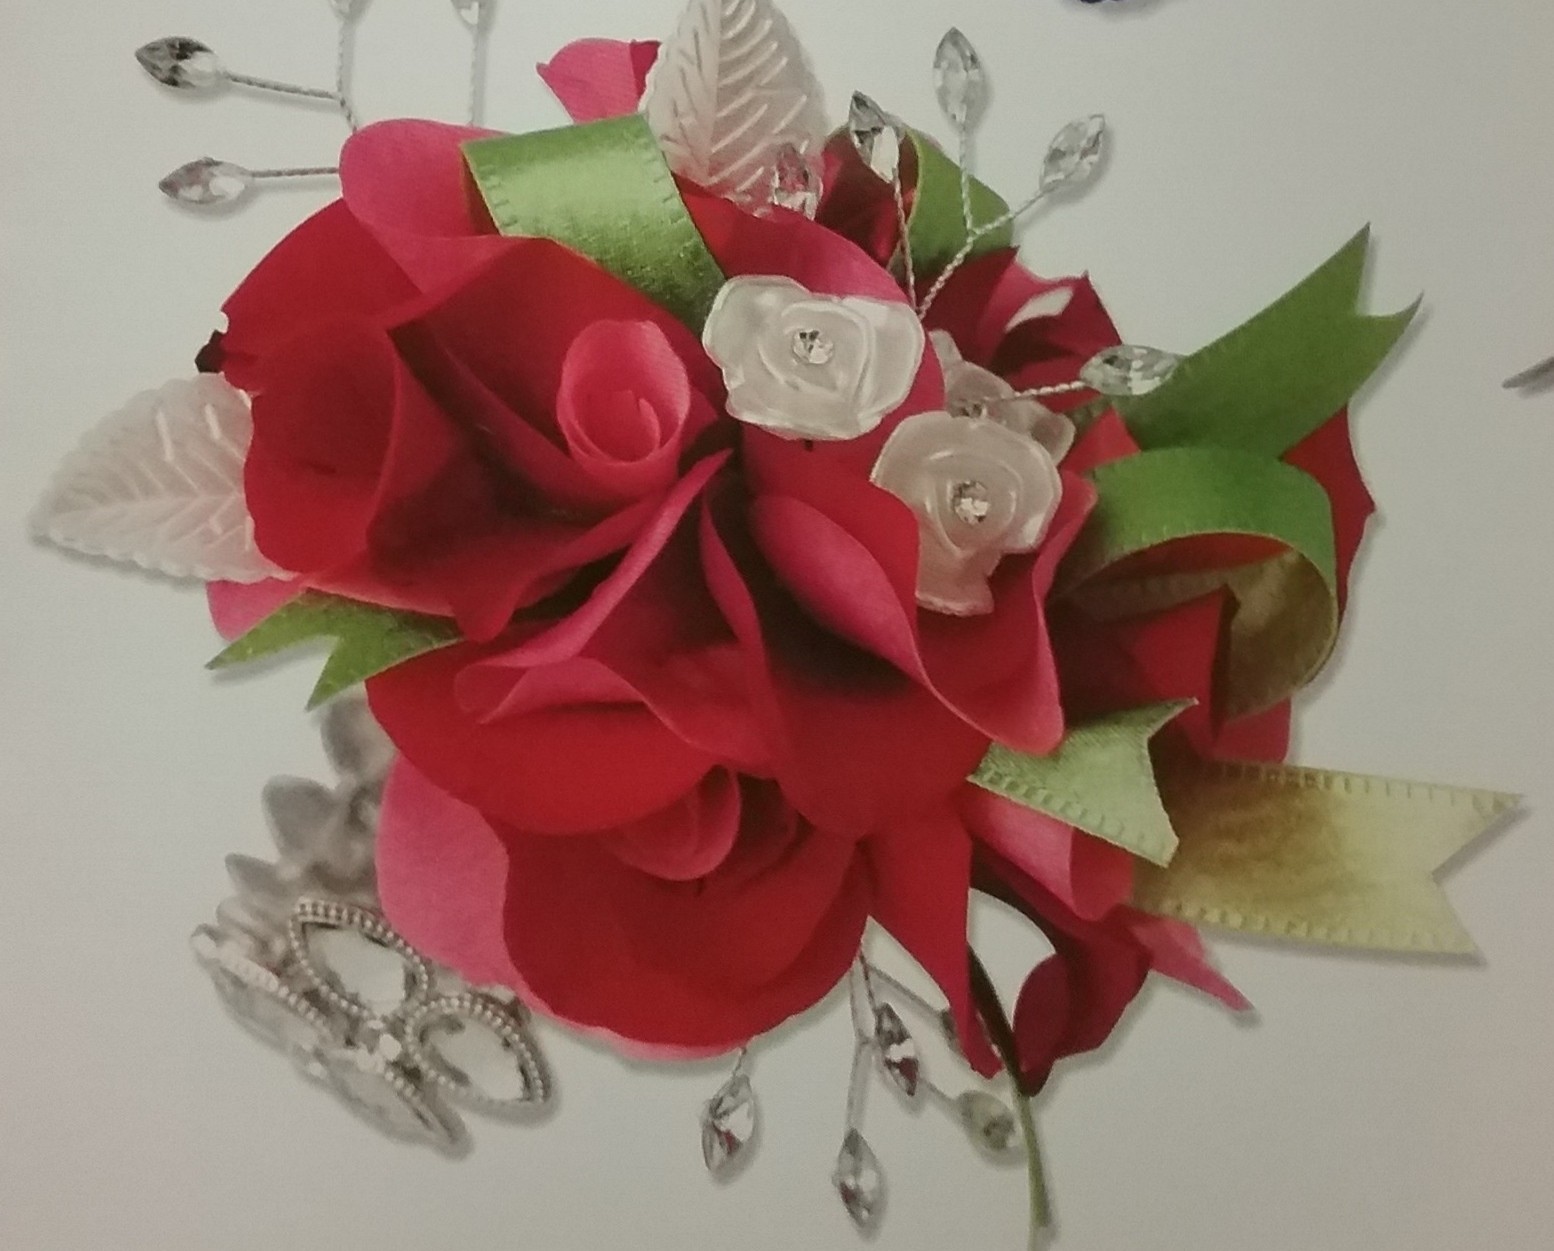 PINK ROSE PETALS AND BLING WRIST CORSAGE in Wamego, KS | The Flower Mill